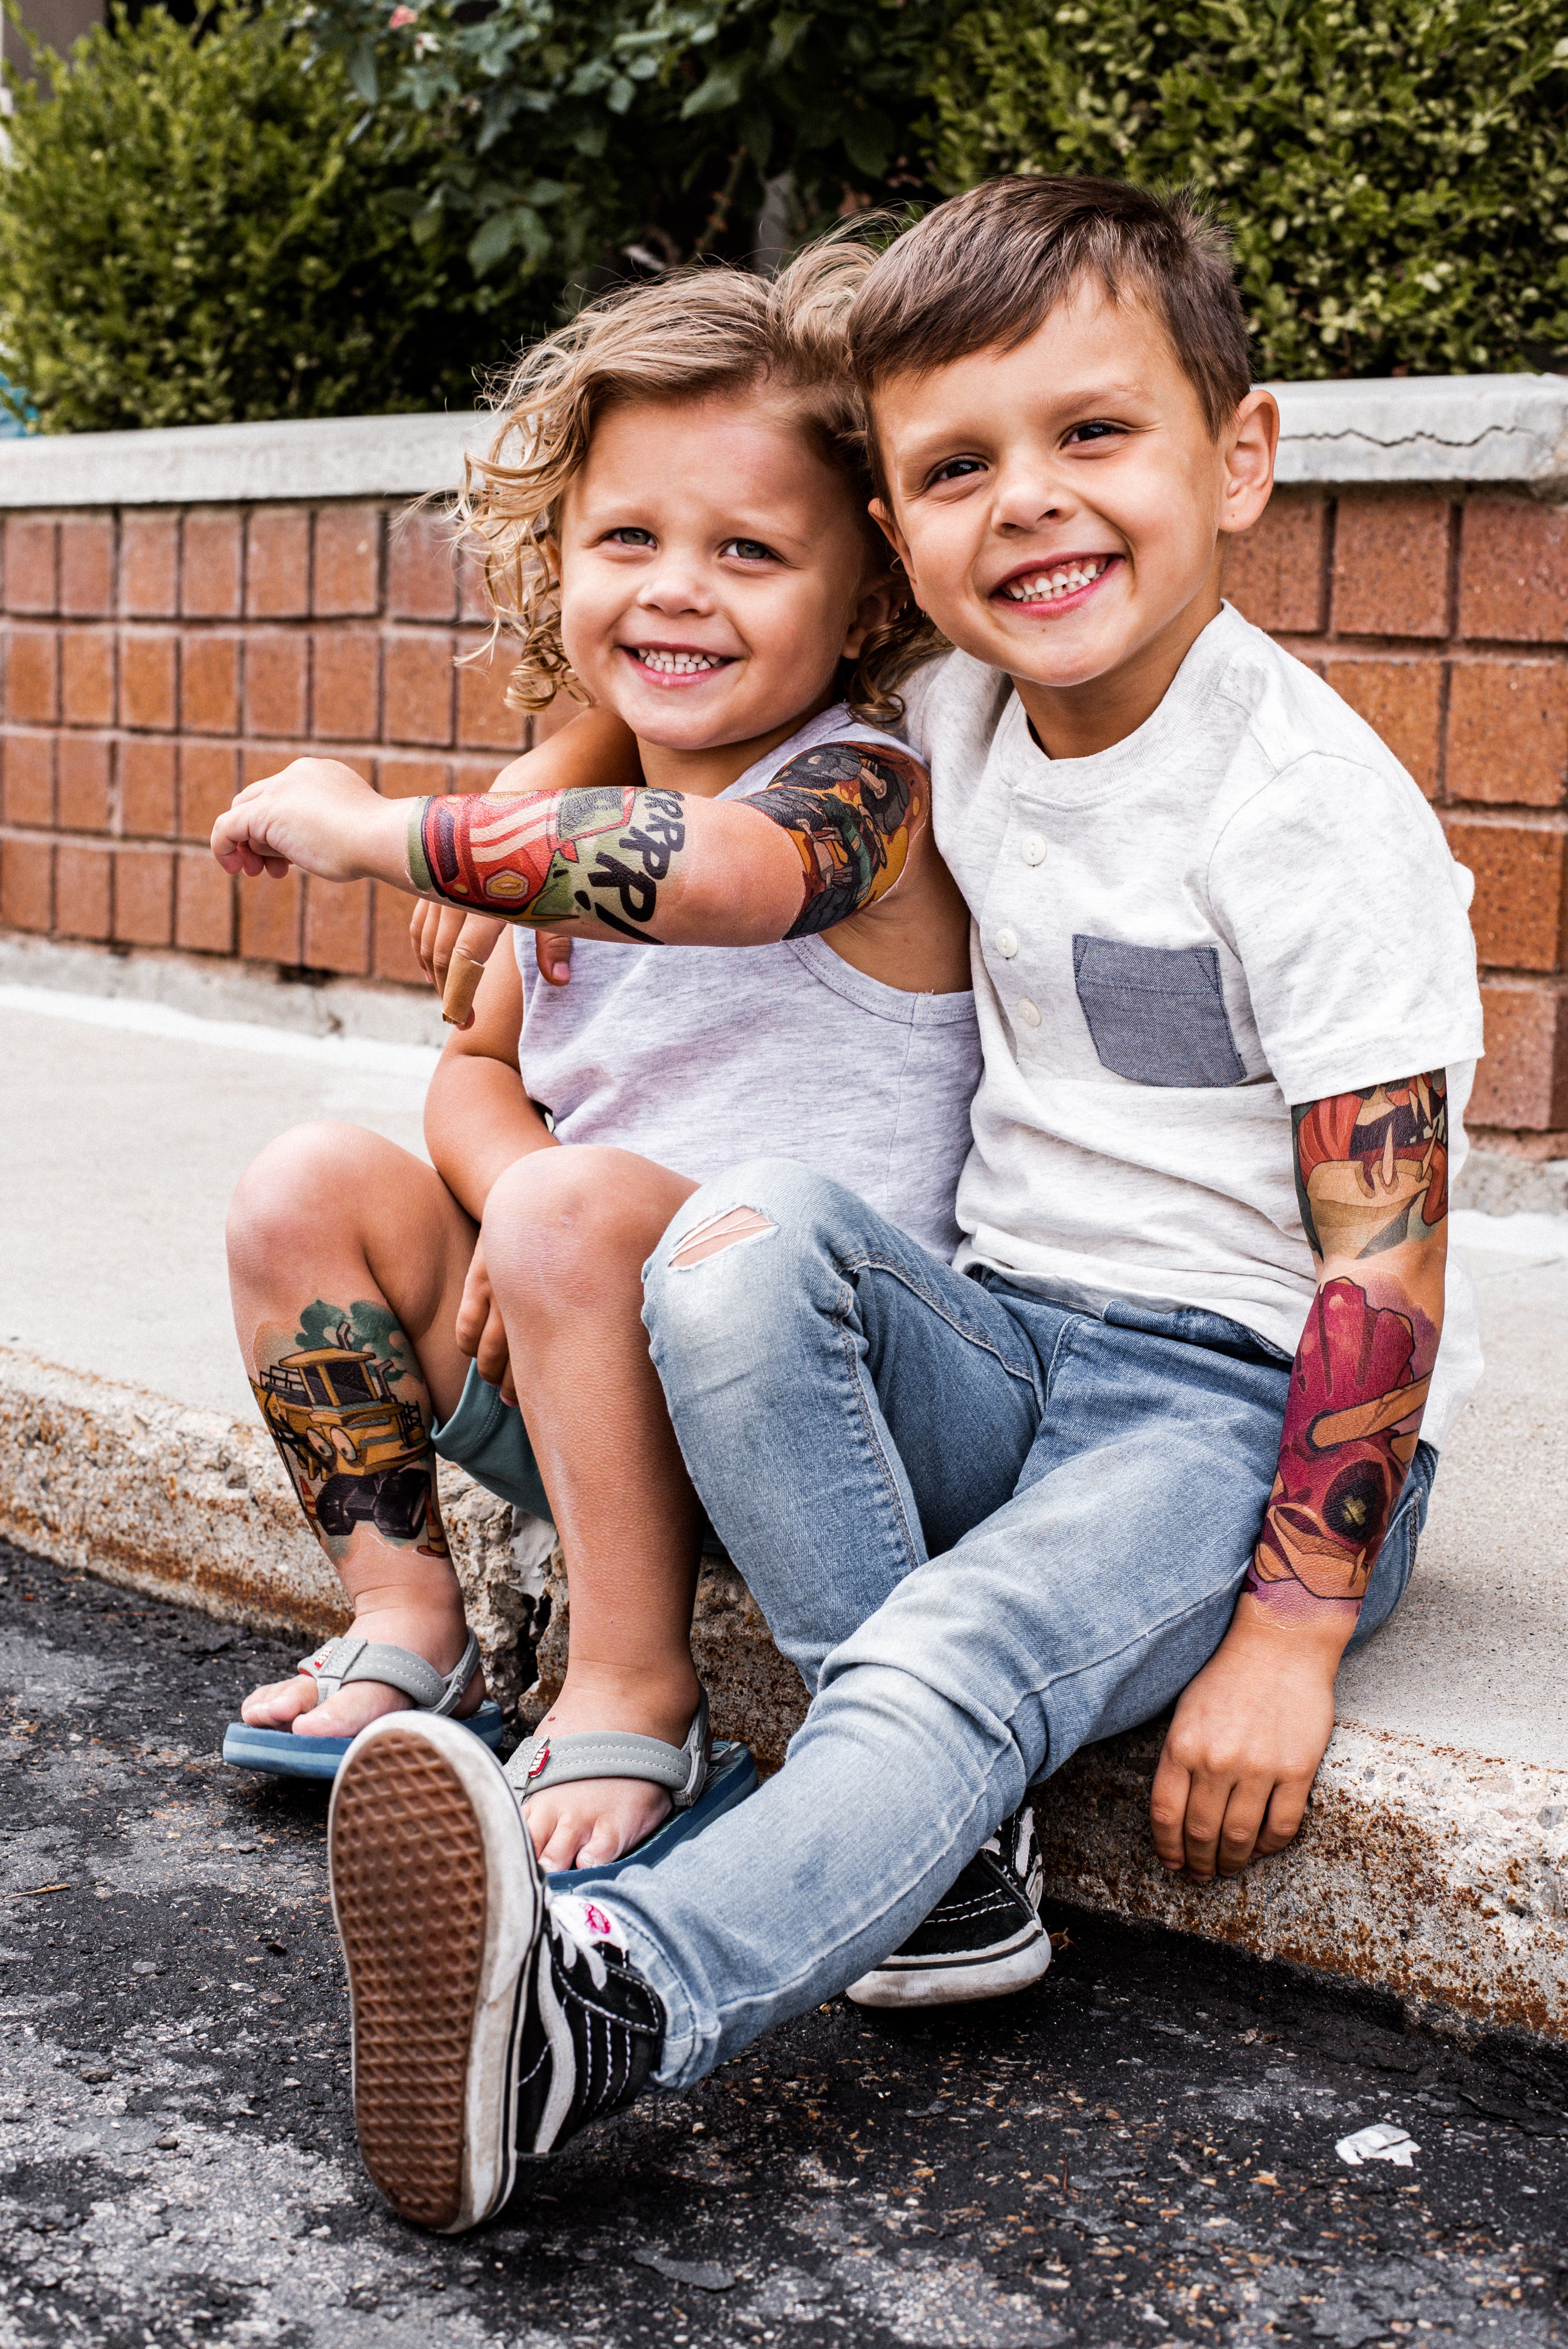 Why Temporary Tattoos are the Perfect Parent-Child Bonding Activity